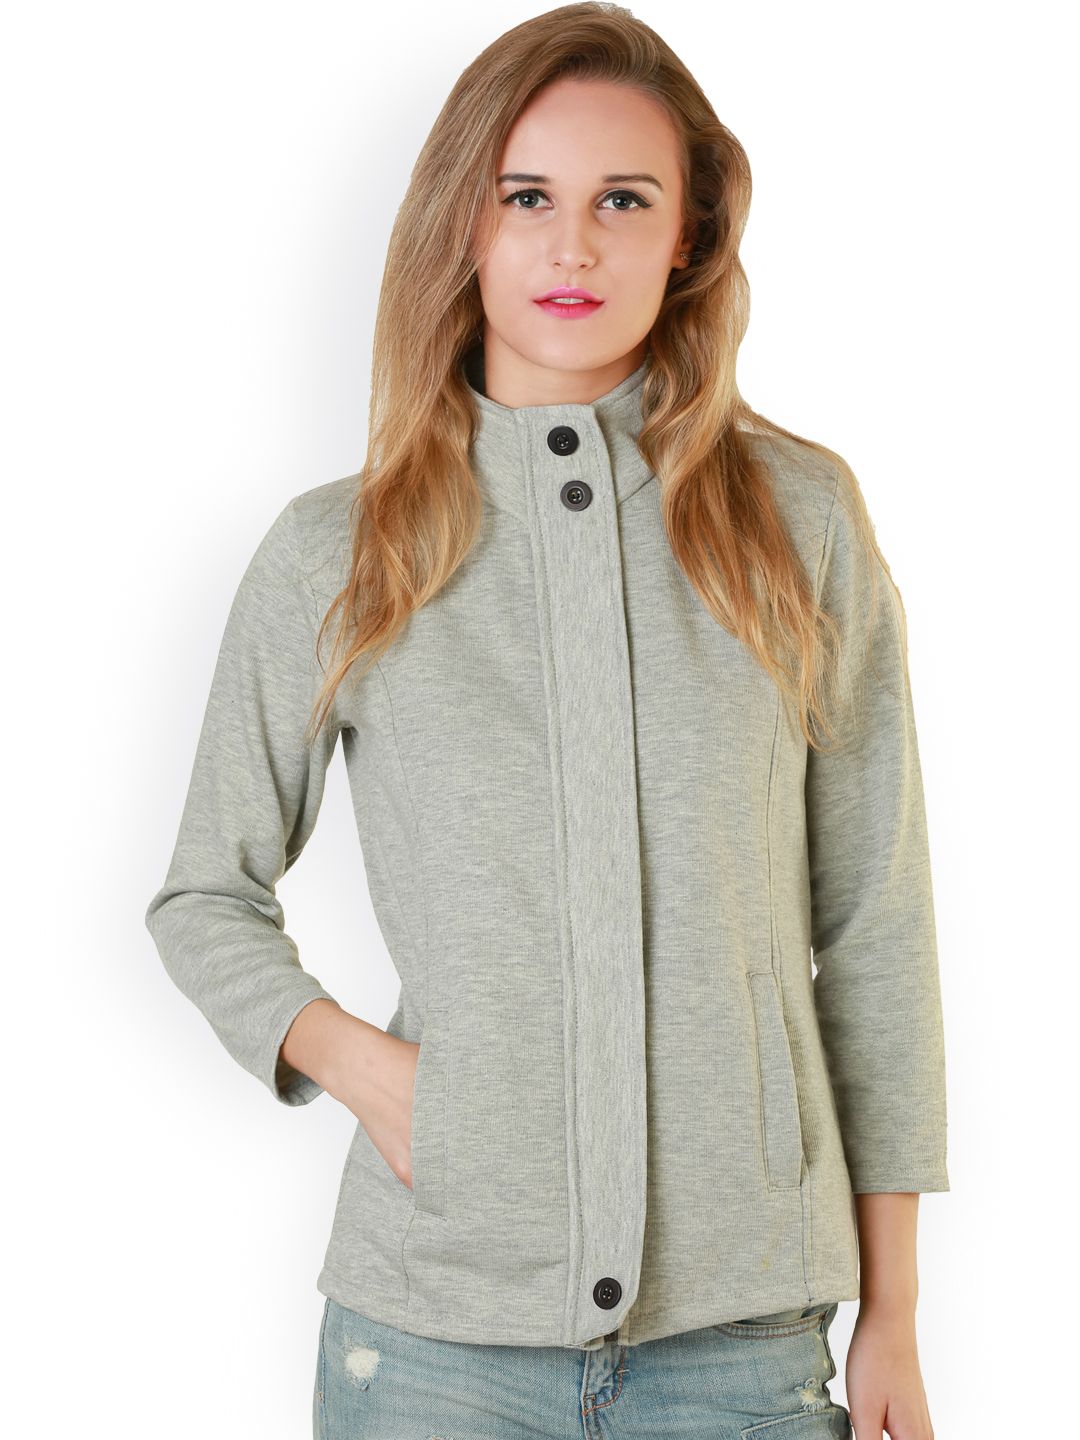 Belle Fille Grey Jacket Price in India